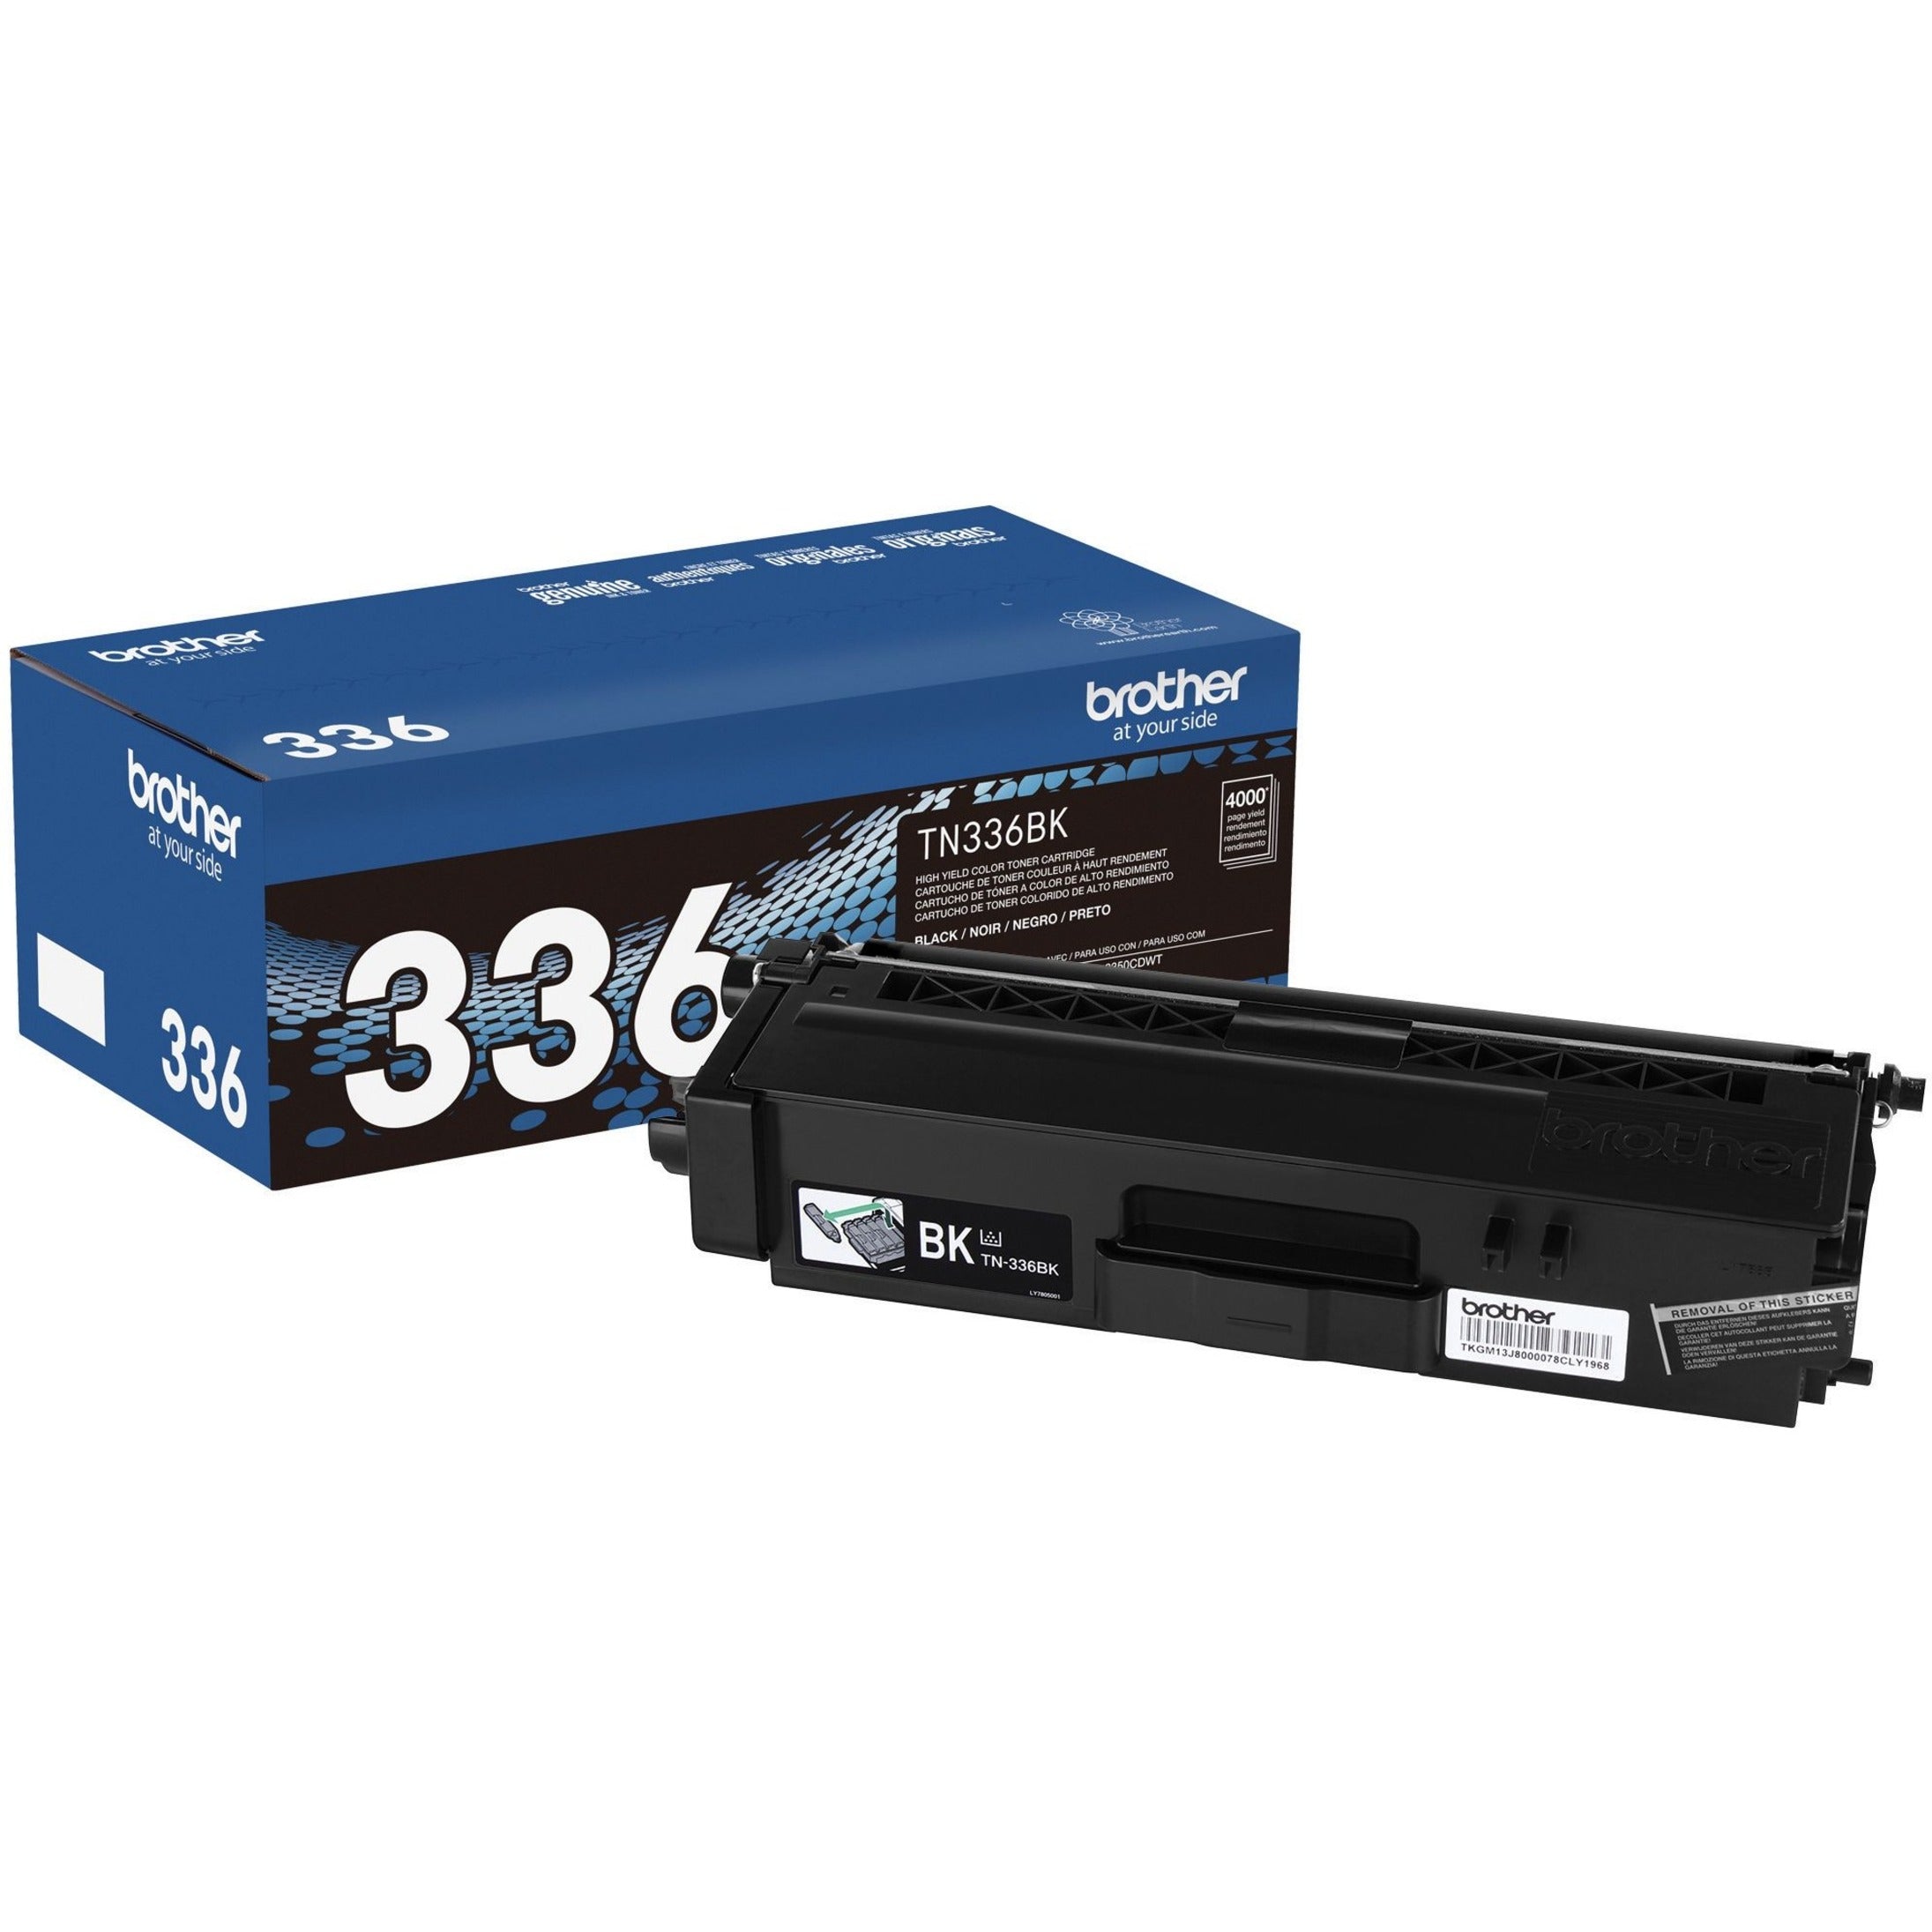 Brother TN336BK High Yield Toner Cartridge, Black, 4000 Pages